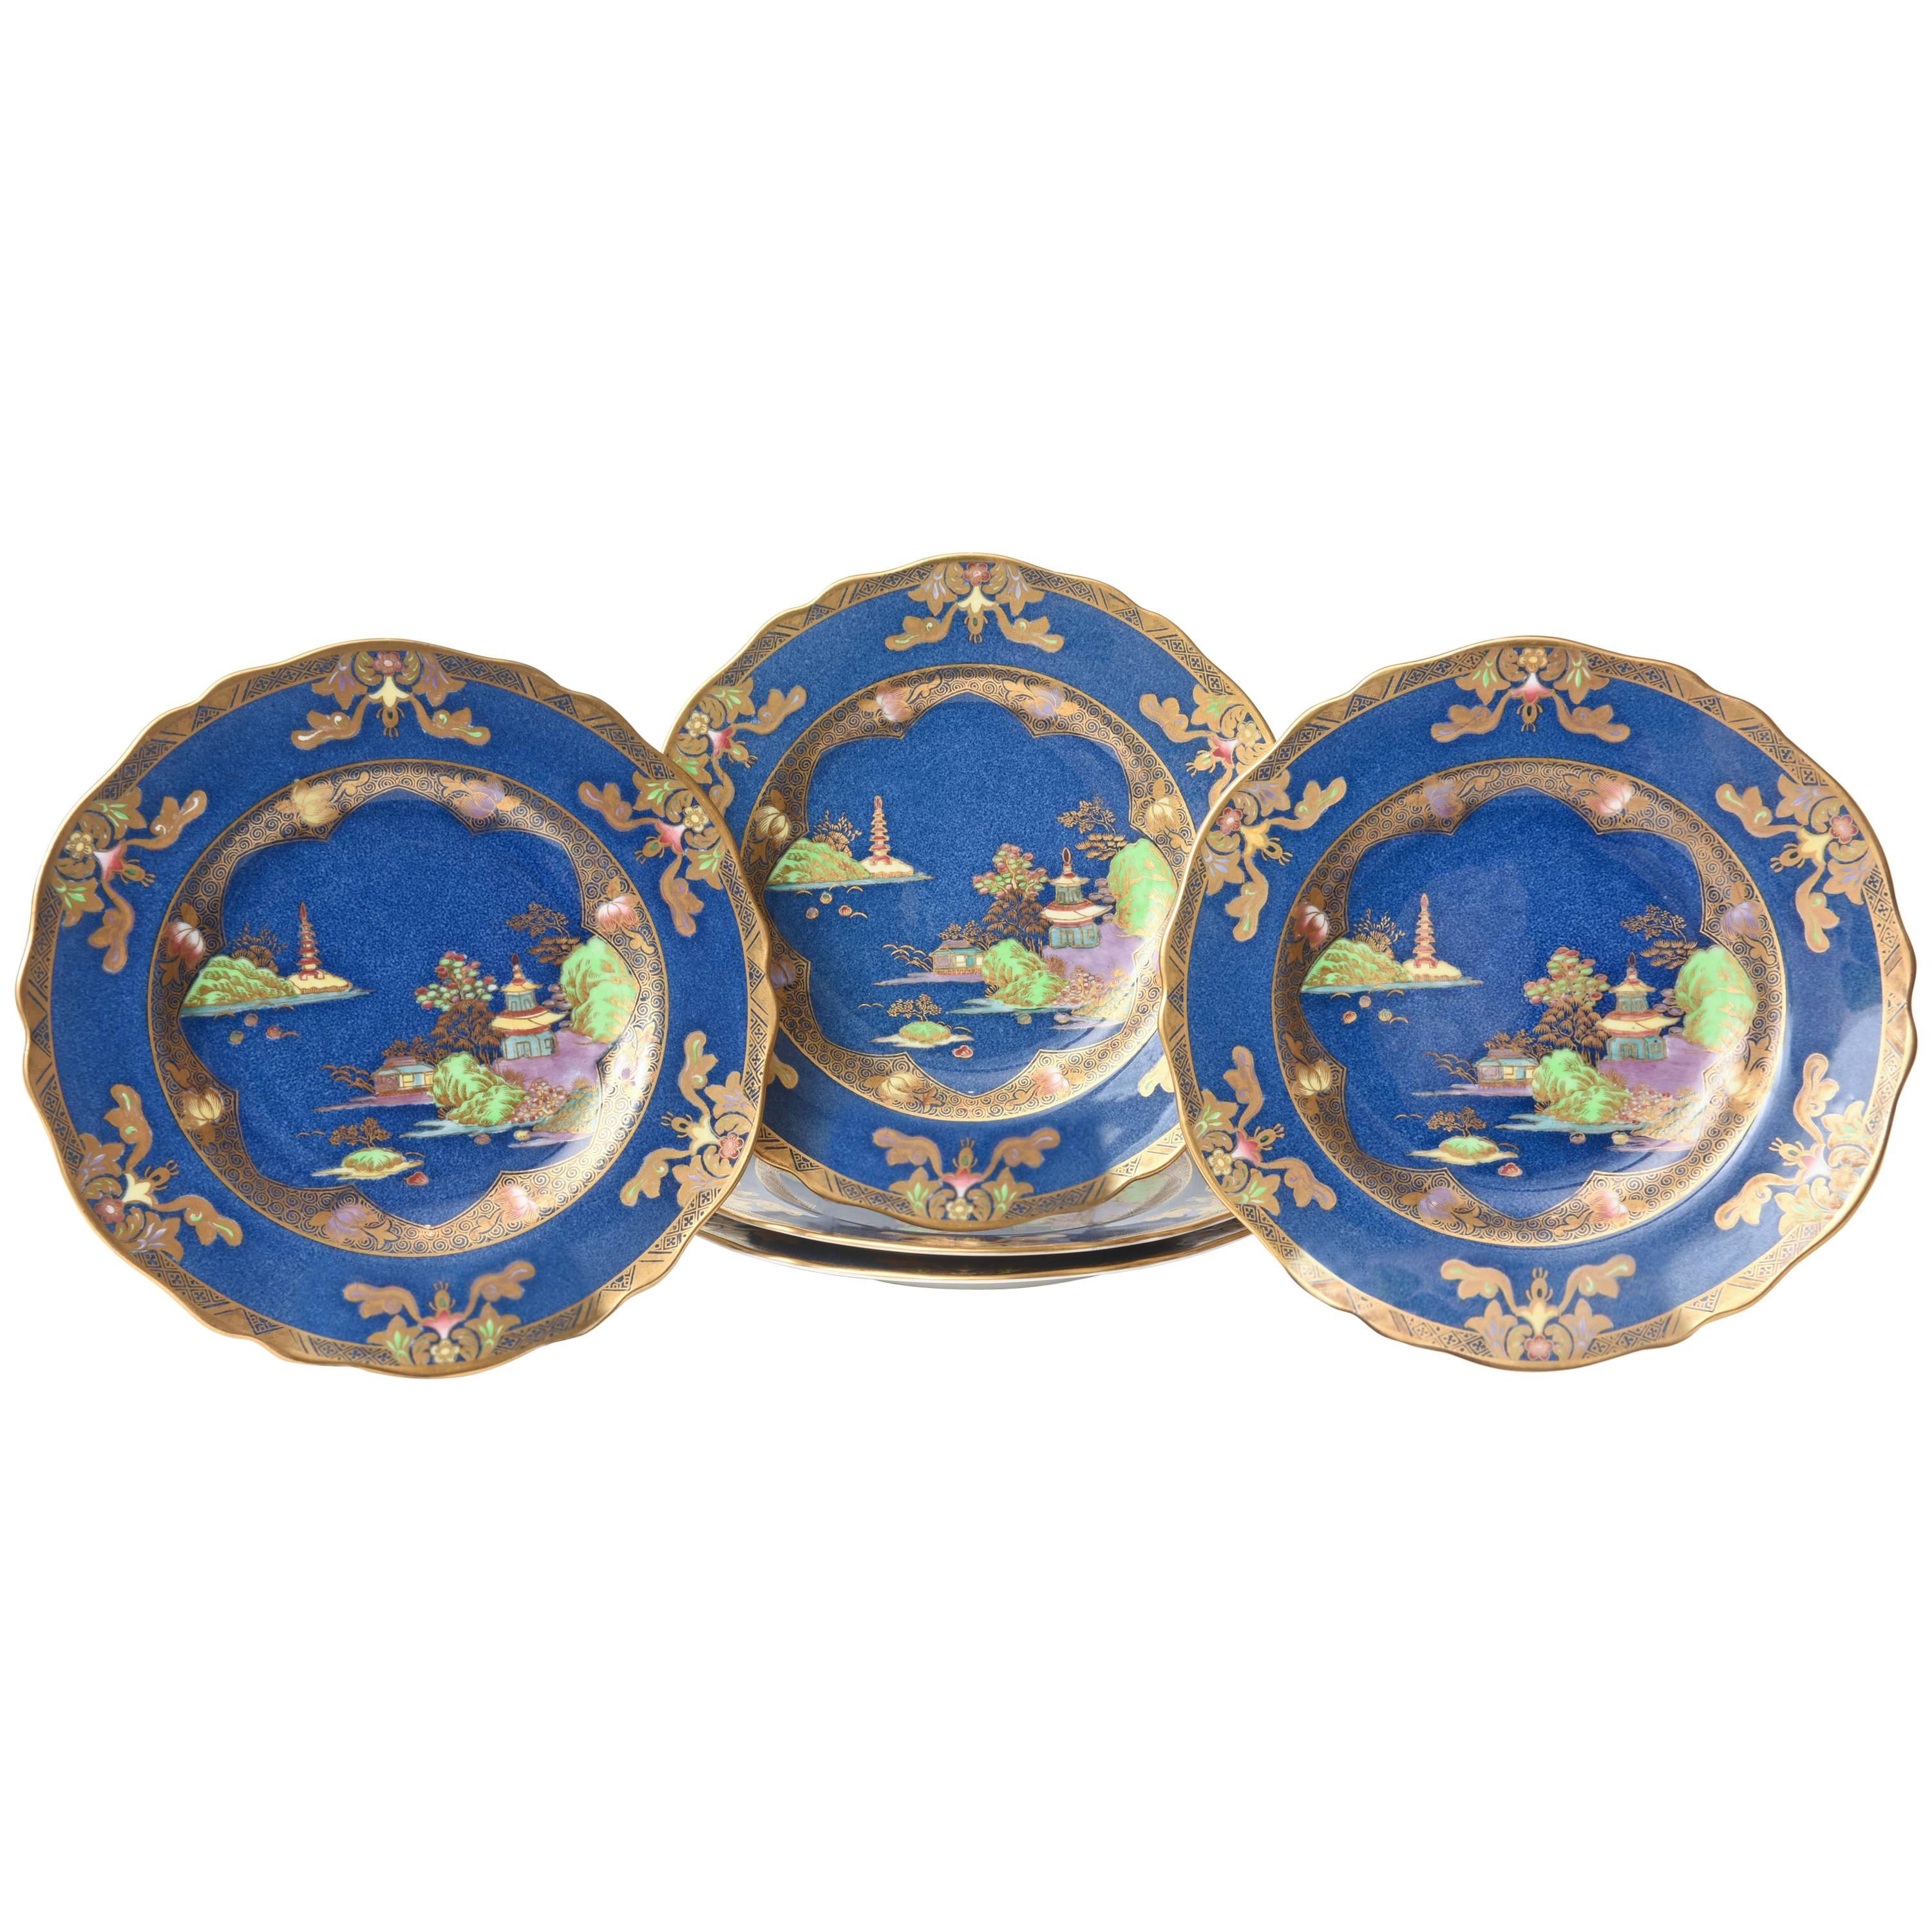 Chinoiserie Design, Spode England, Crushed Lapis and Hand Enameled Plates